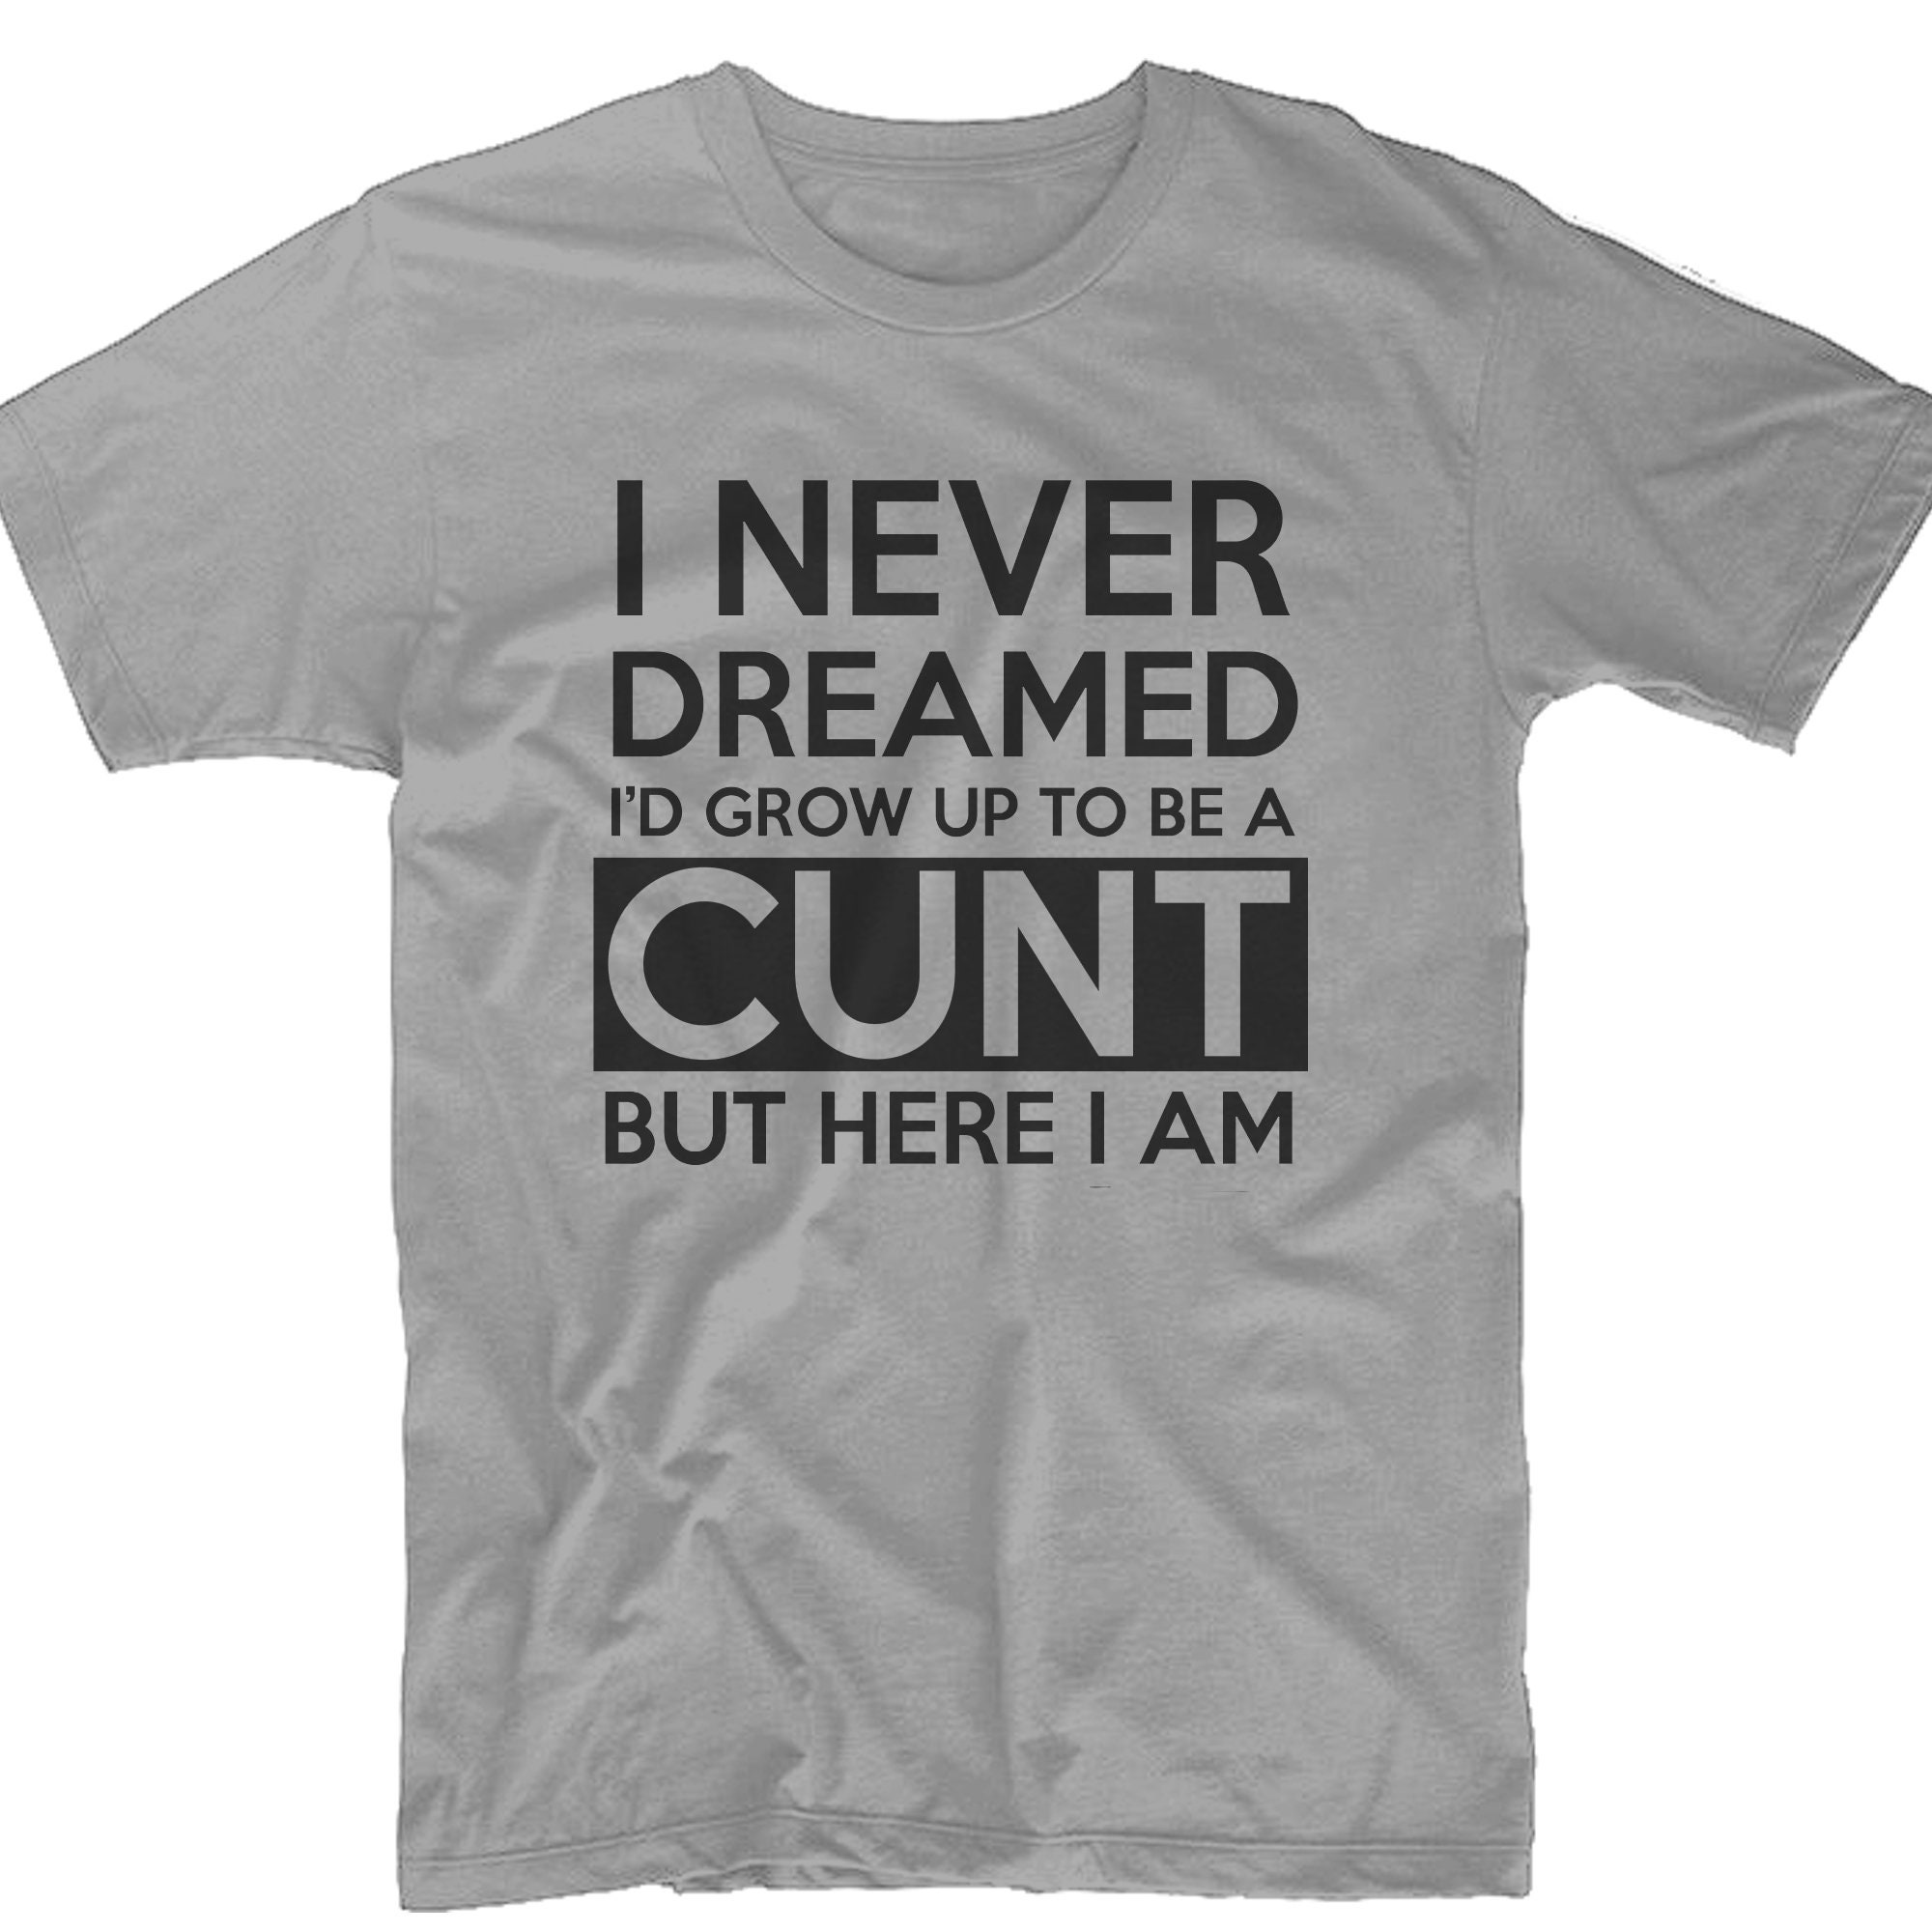 Funny Cunt Shirt image